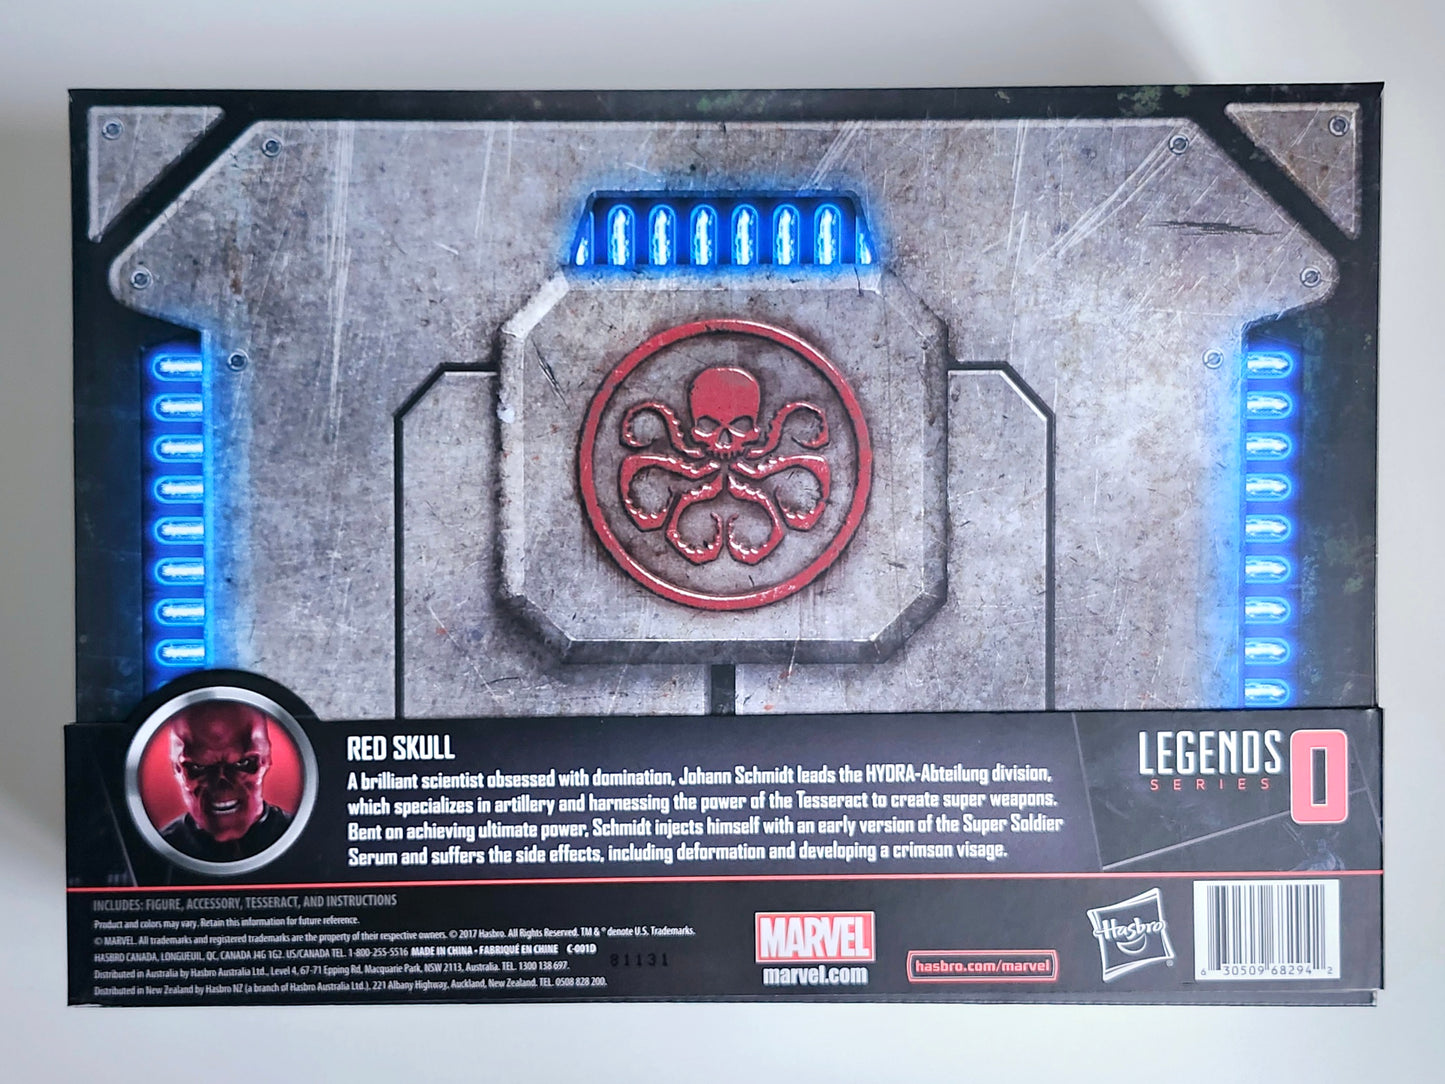 Marvel Legends SDCC 2018 Exclusive Red Skull 6-Inch Action Figure and Electronic Tesseract Set